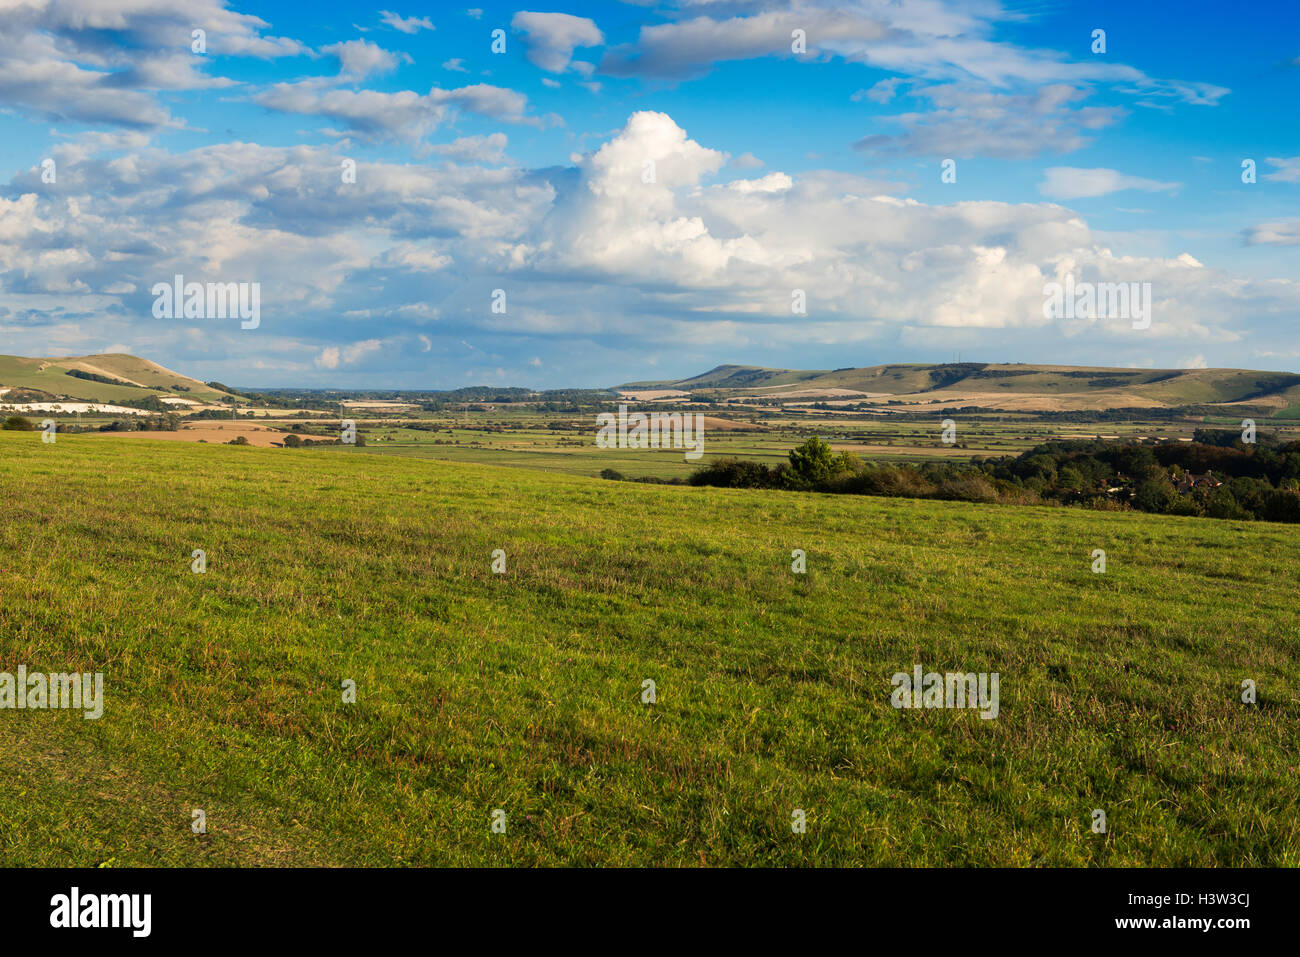 A view across the Ouse valley towards Firle Beacon on an autumn afternoon, East Sussex, England, UK Stock Photo